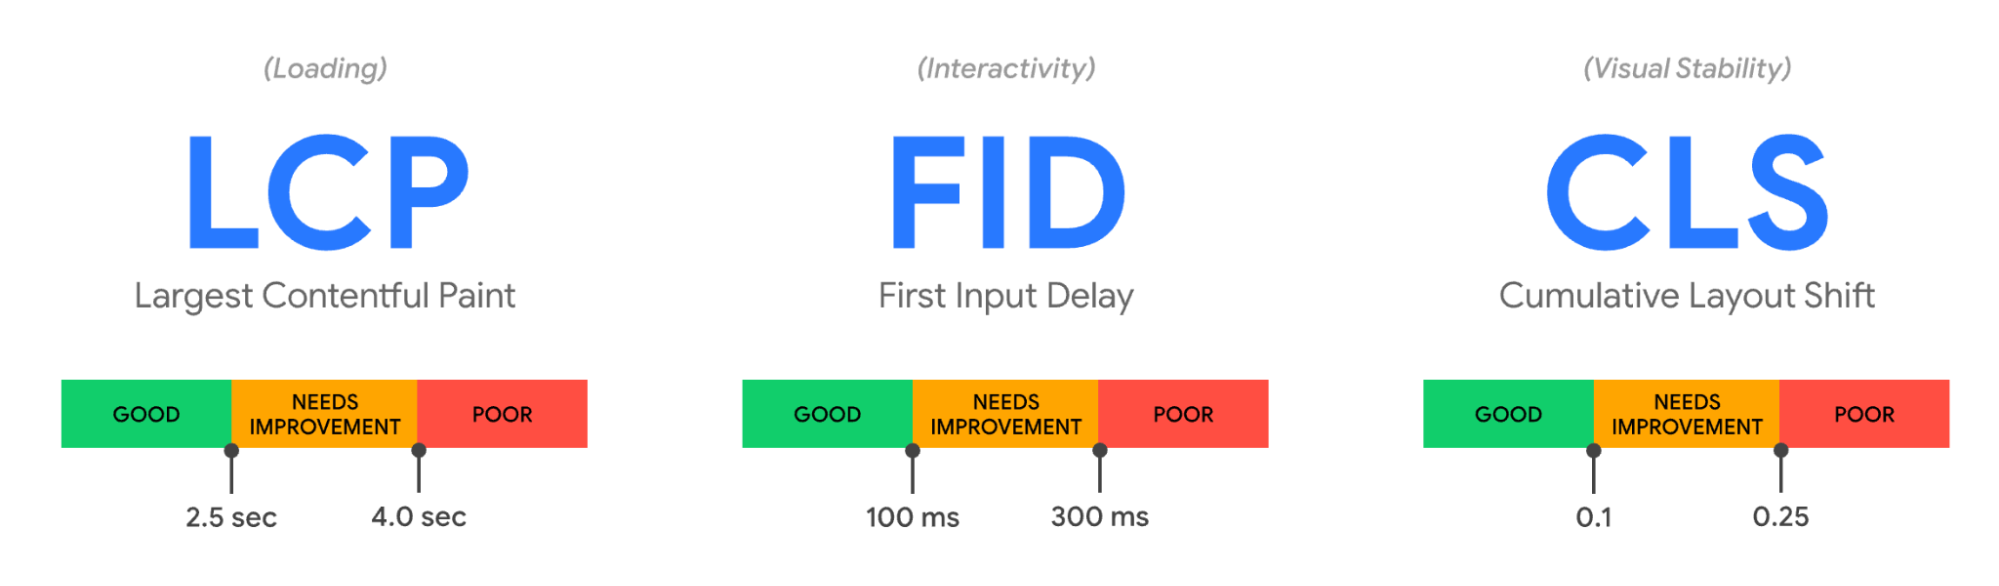 Google's core web vitals—LCP, FID, and CLS